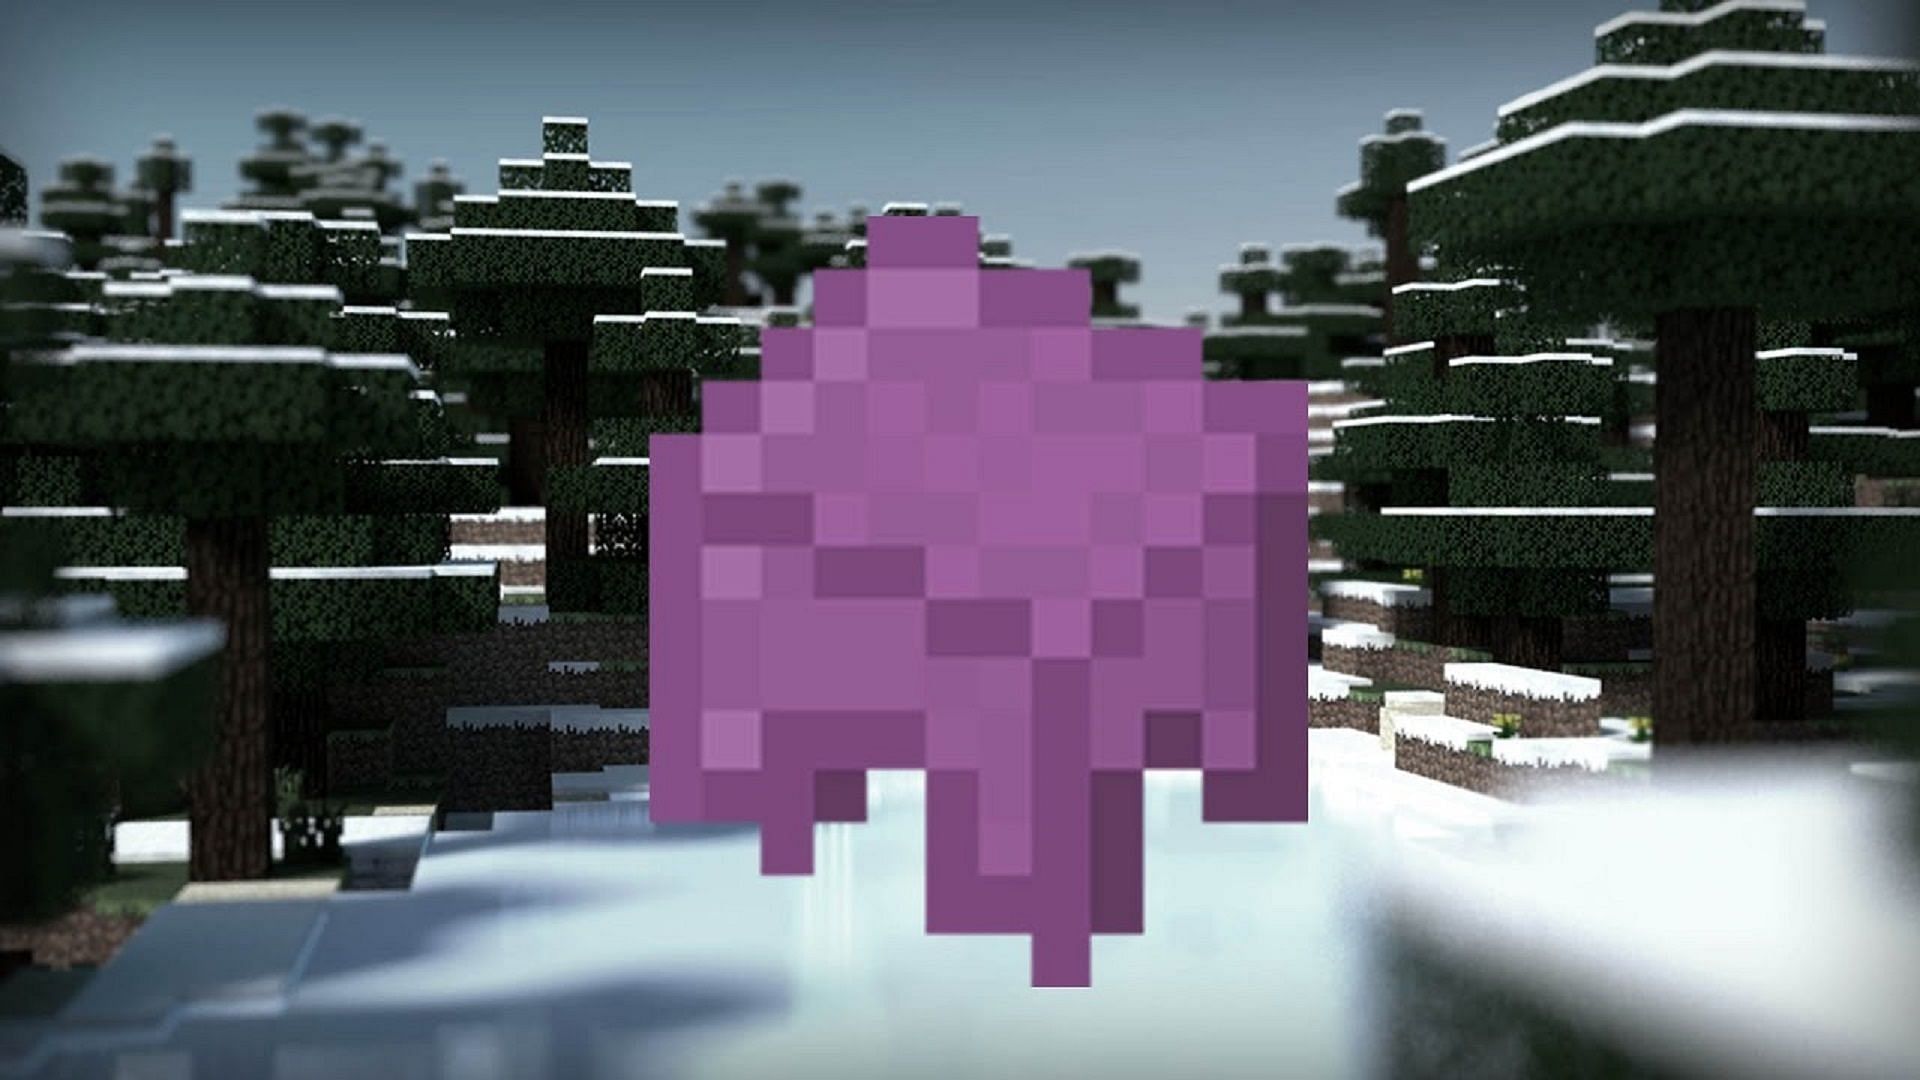 Shulker Shells, as the name implies, are obtained from Shulkers in Minecraft (Image via Minecrafting/YouTube)